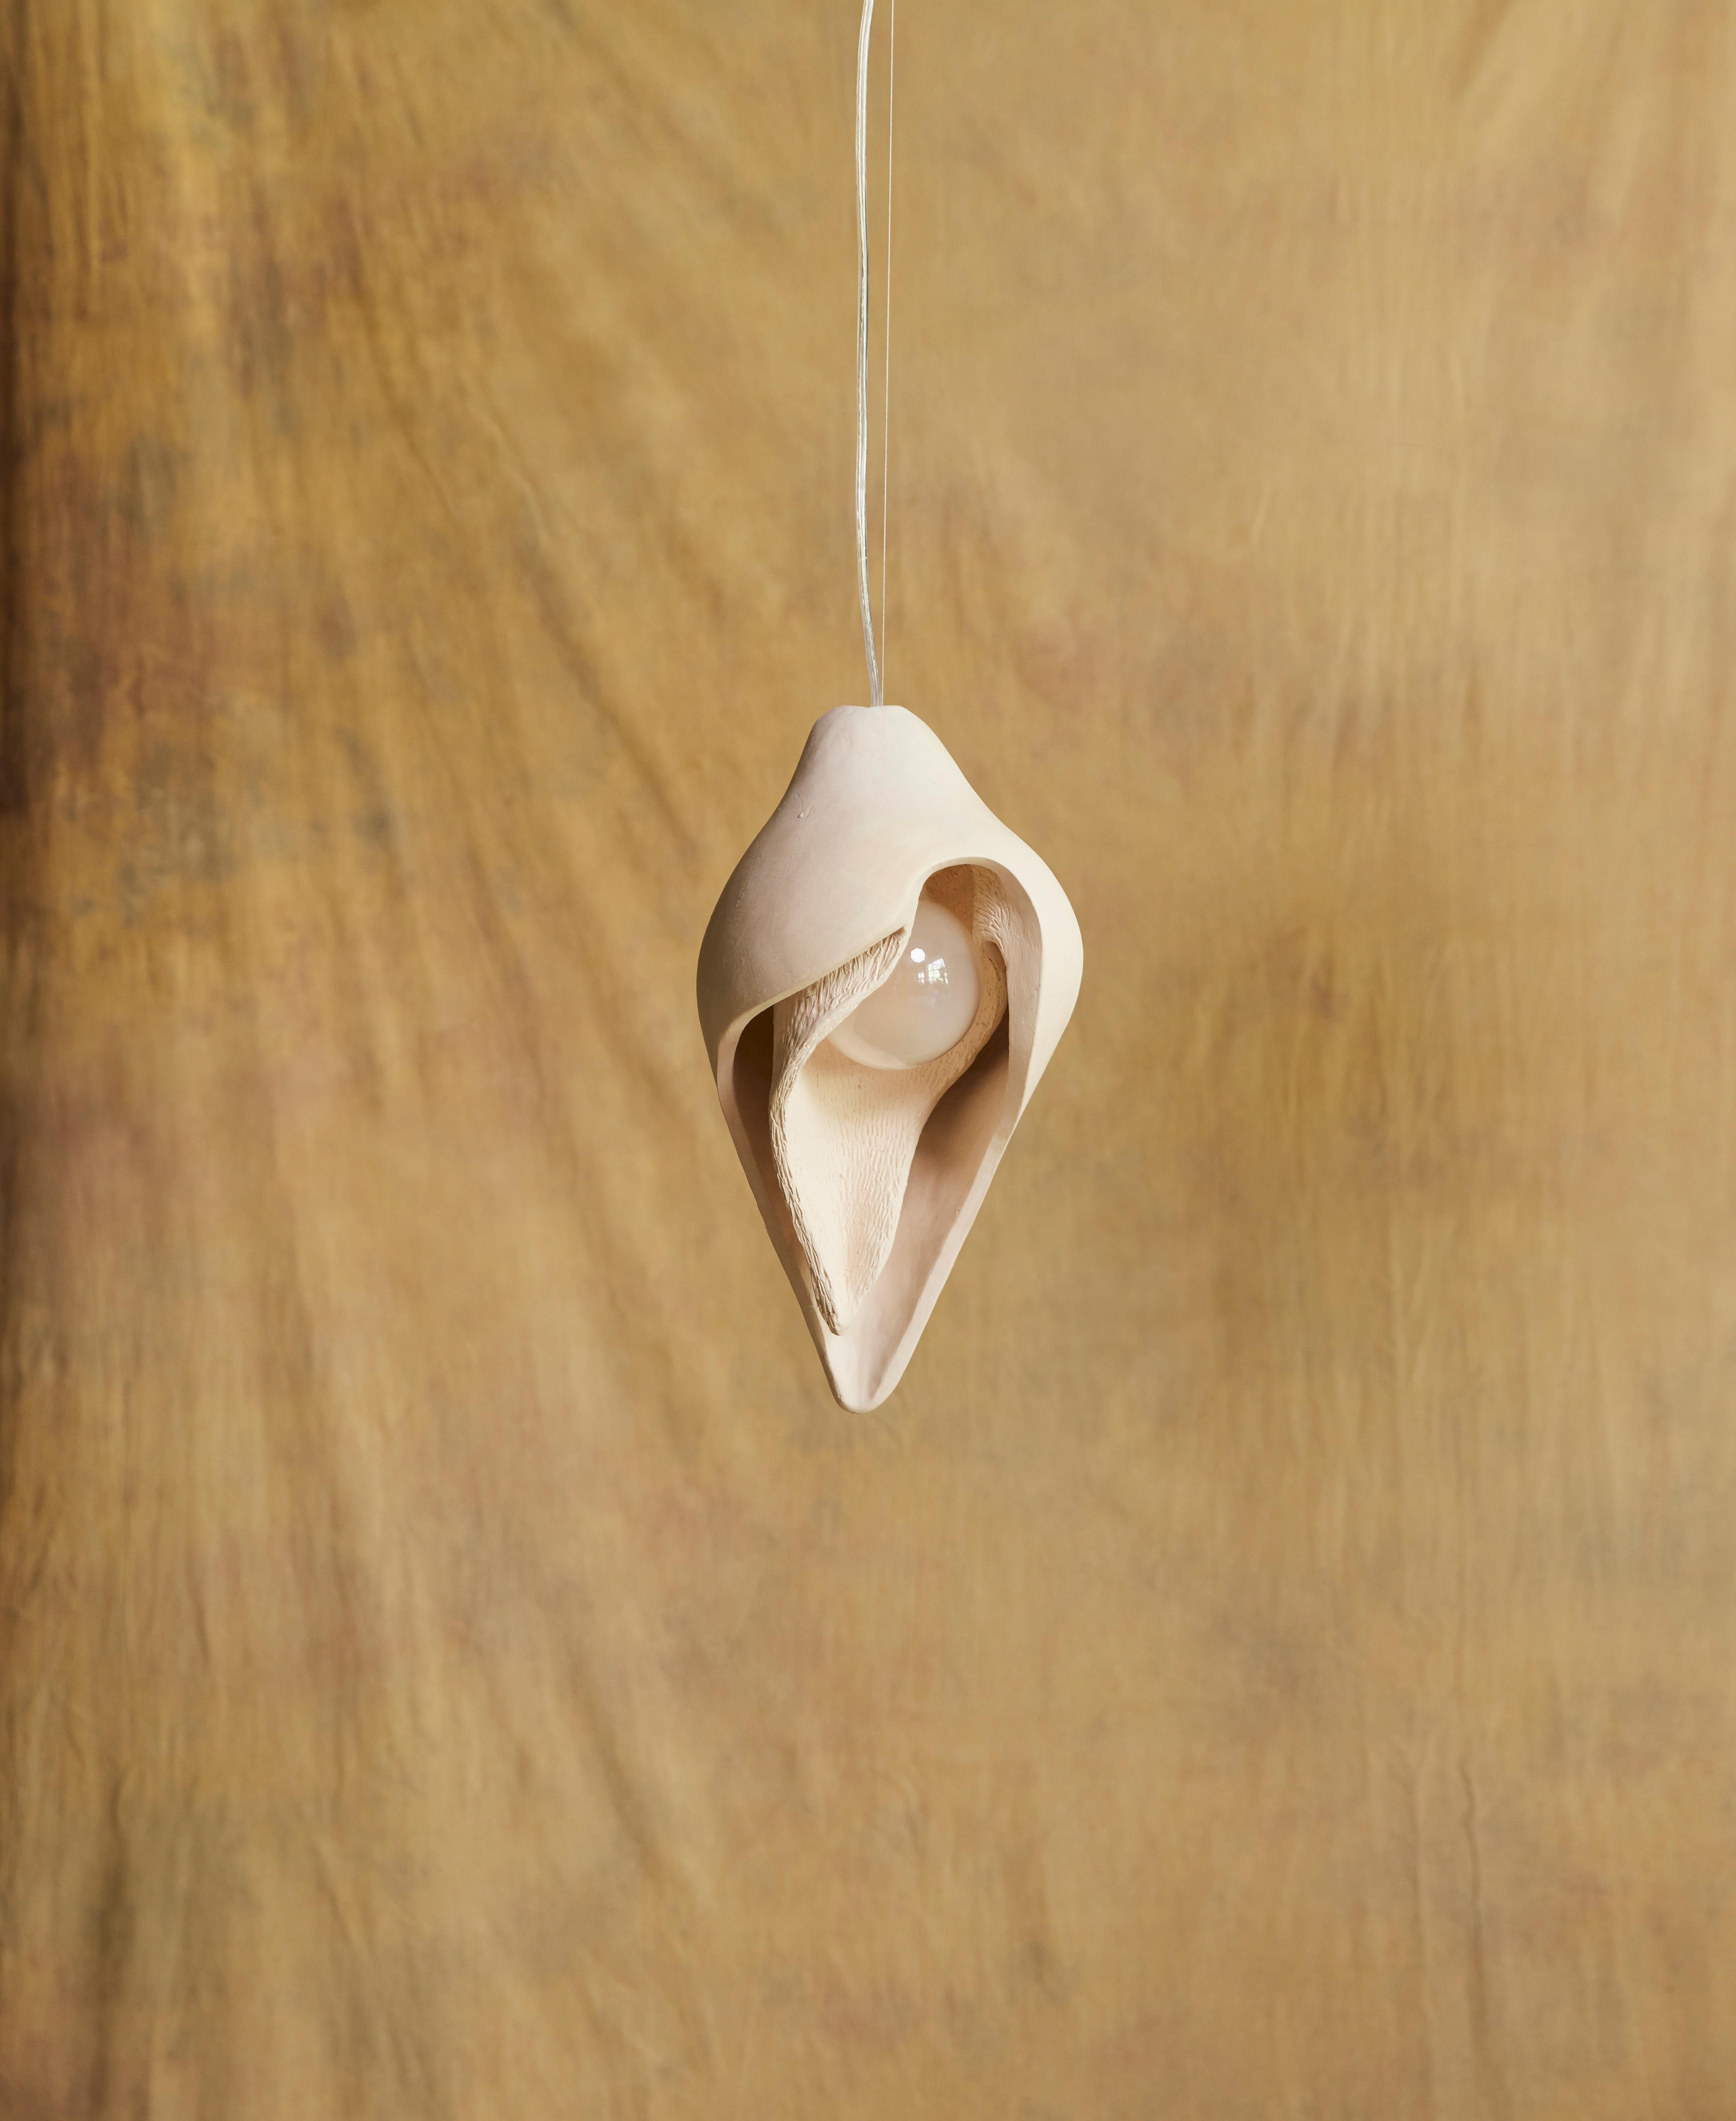 Small Womb pendant lamp by Jan Ernst
Dimensions: D 18 W 18 H 38 cm
Materials: White stoneware


The Origin Collection is a collaboration between Jan Ernst and Colin Braye. The work translates the complexity and delicacy of biological and